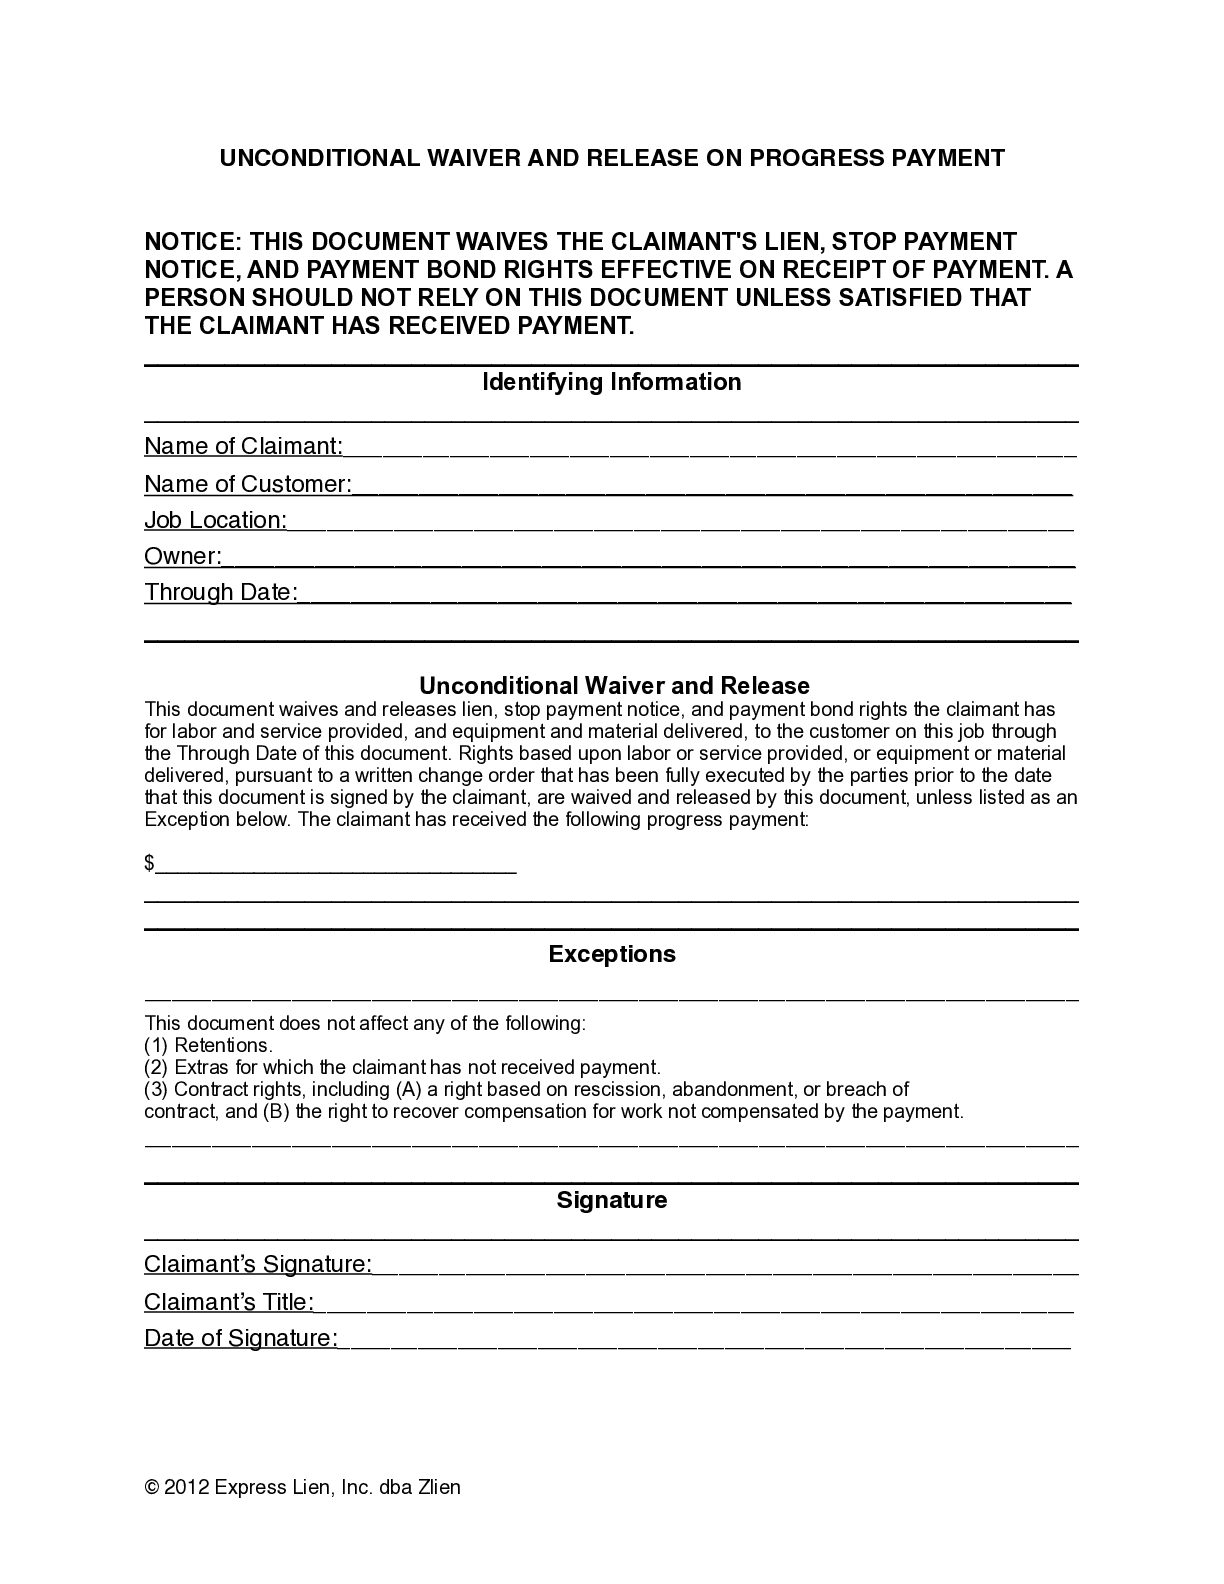 Washington Partial Unconditional Lien Waiver Form - free from